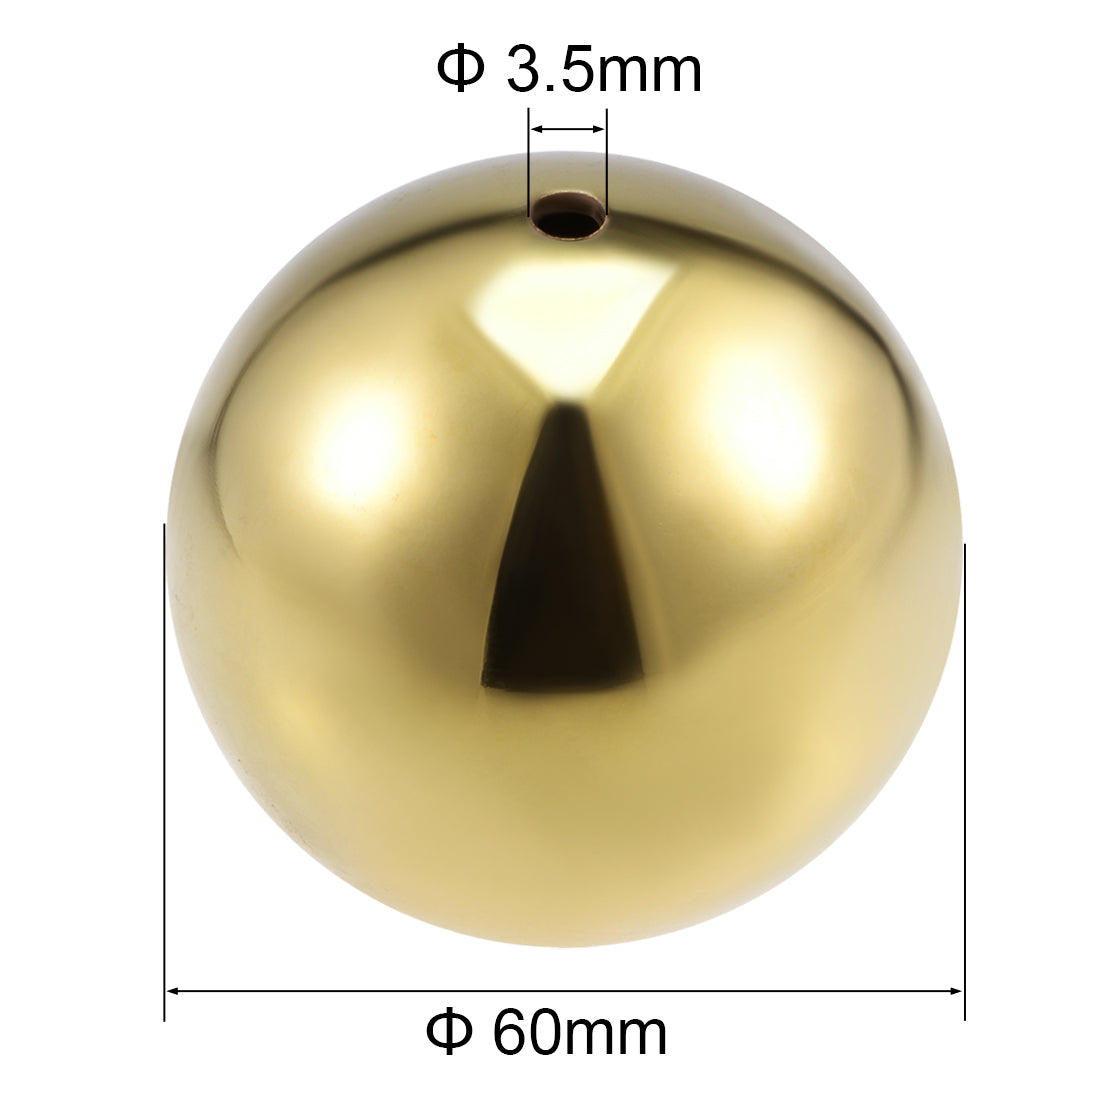 uxcell Uxcell 60mm Dia 201 Stainless Steel Hollow Cap Ball Spheres for Handrail Stair Newel Post Gold Tone 2pcs